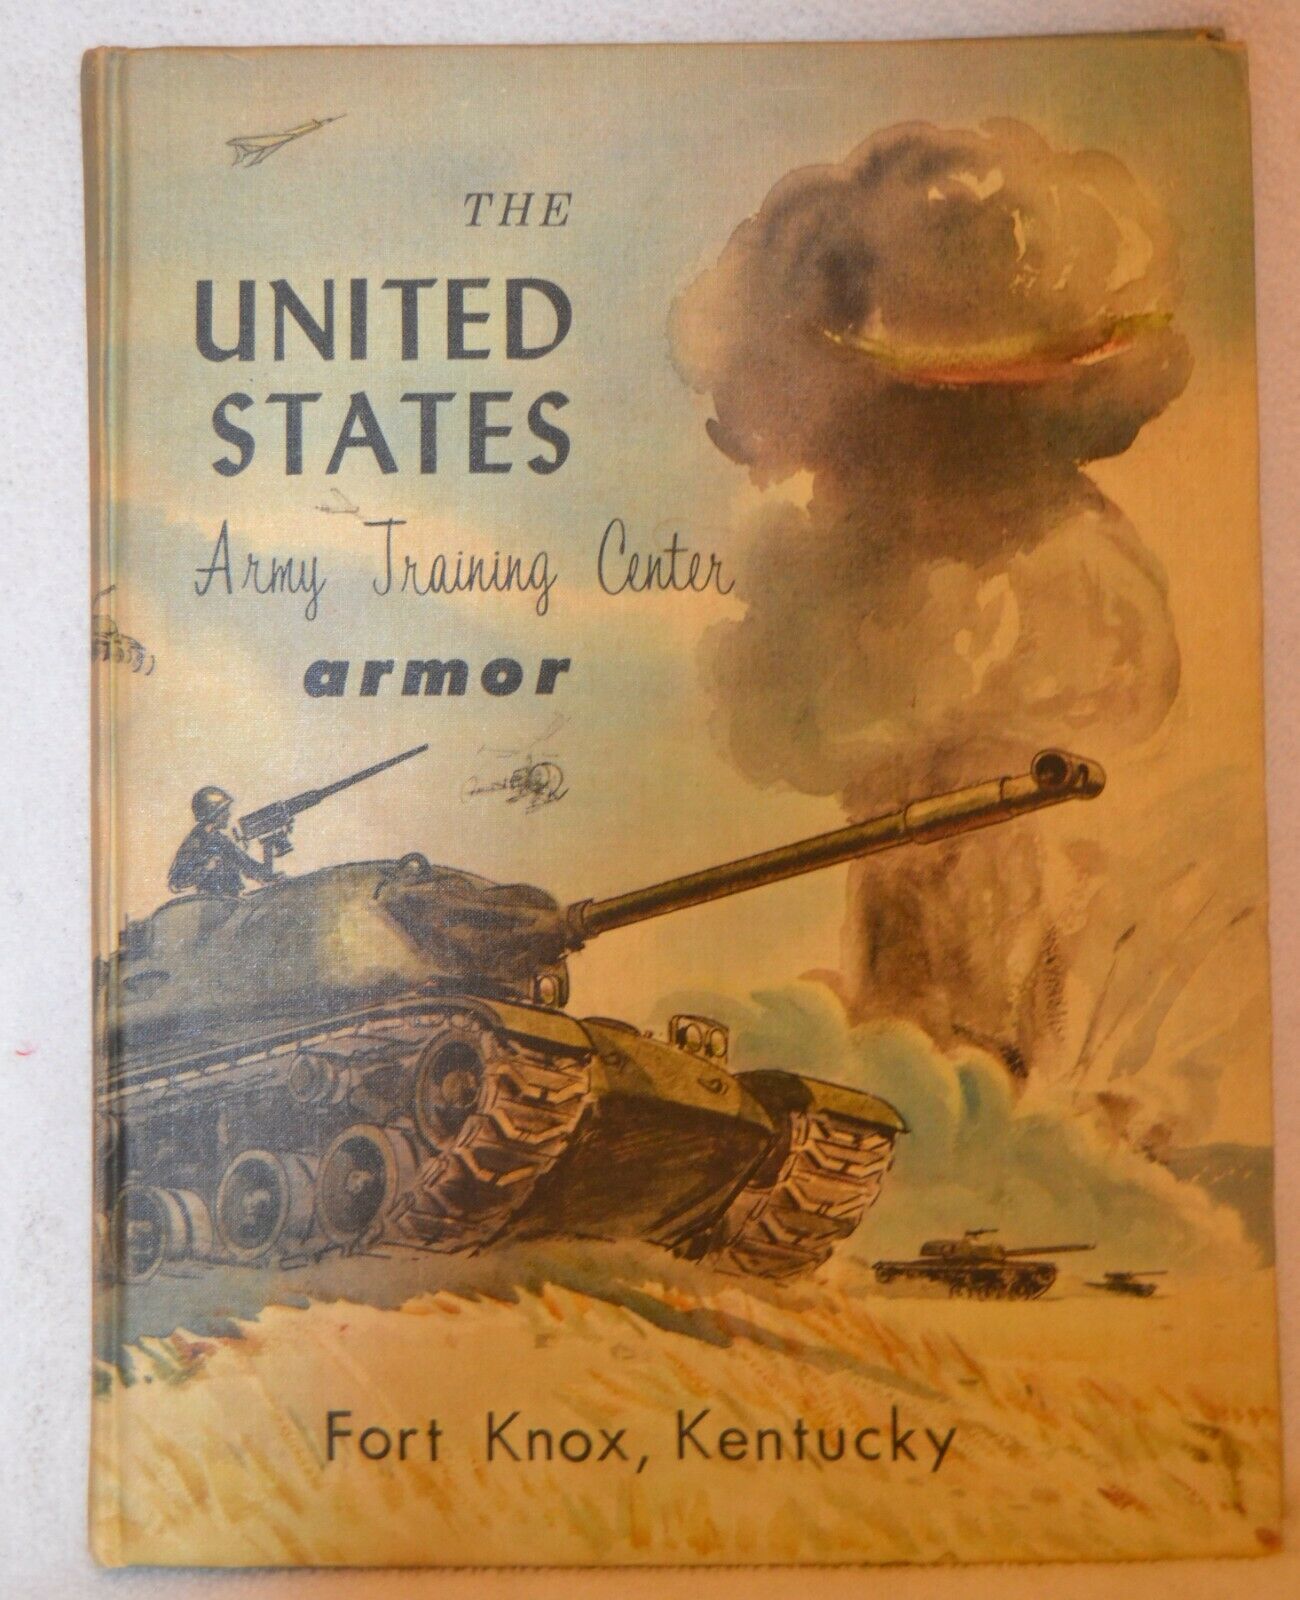 Fort Knox Kentucky UNITED STATES ARMY TRAINING CENTER ARMOR Hardcover Book 1960s - $42.06